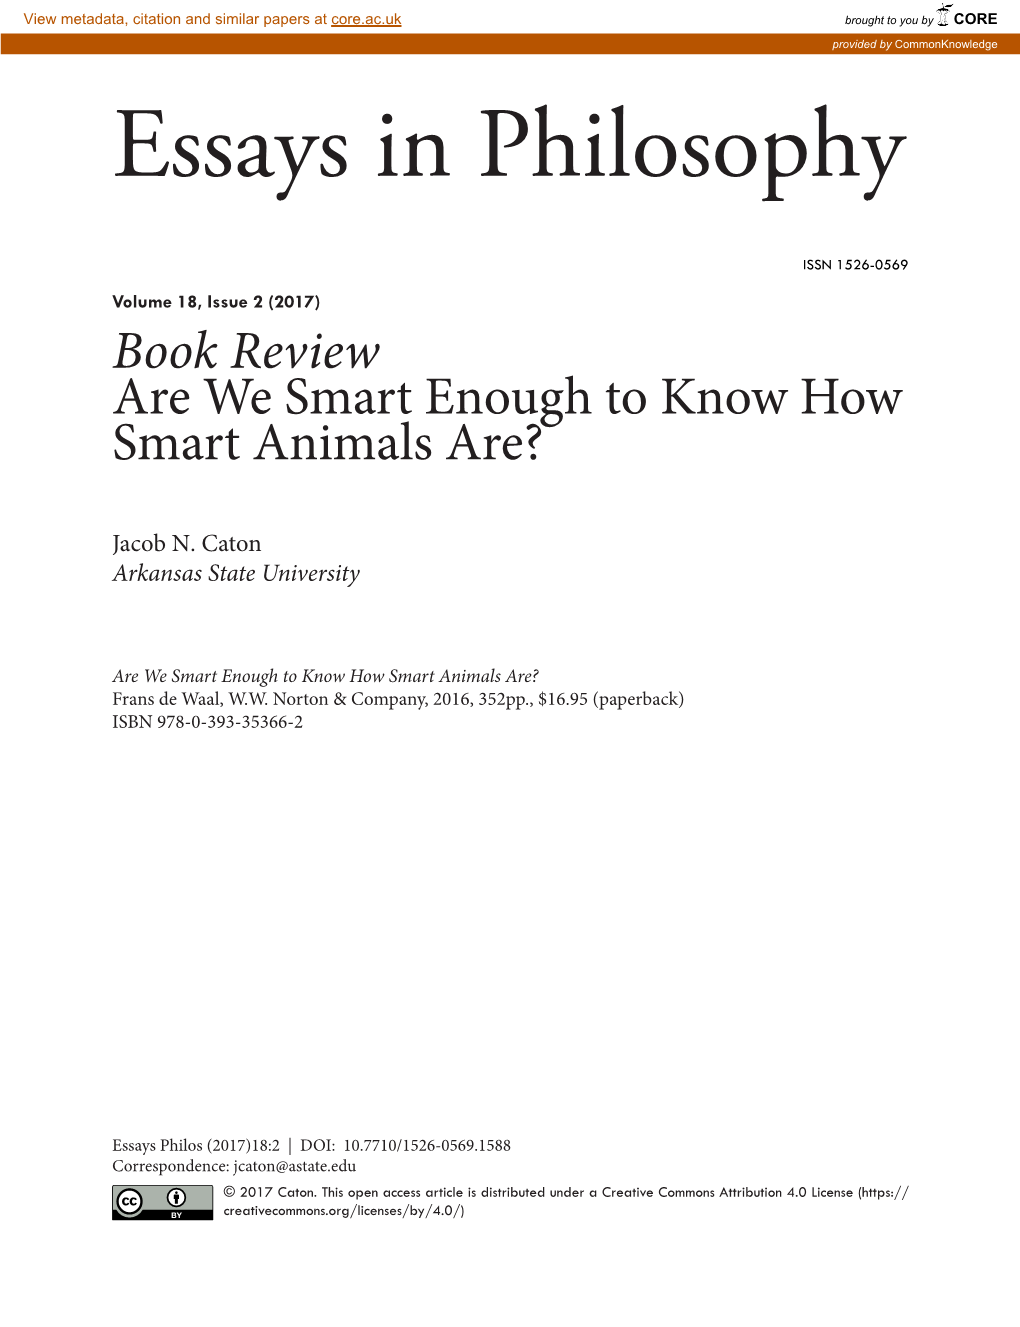 Review of "Are We Smart Enough to Know How Smart Animals Are?"